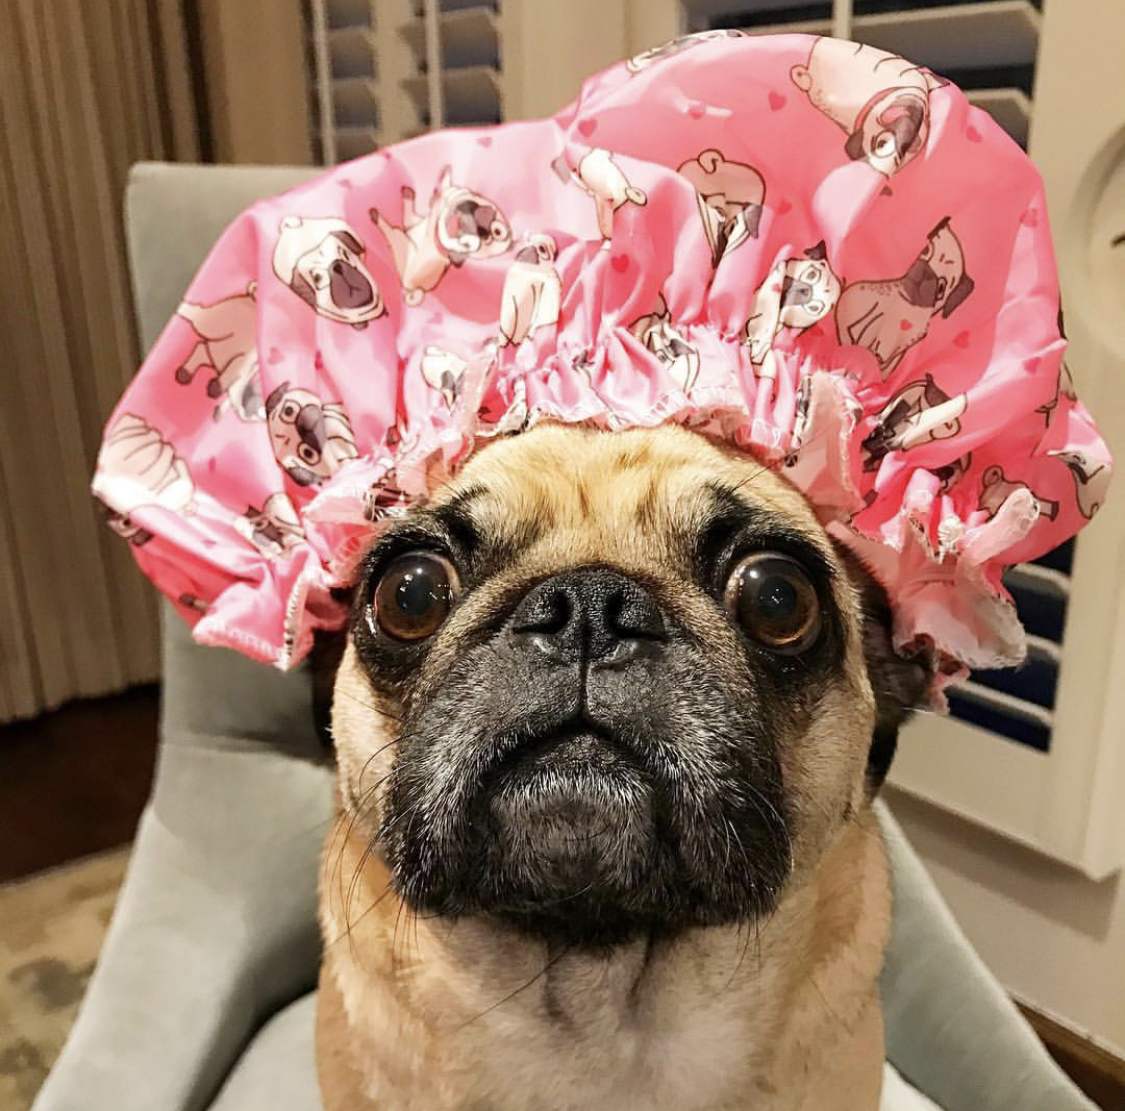 Pug wearing a shower cap designed with animated pug on top of its head